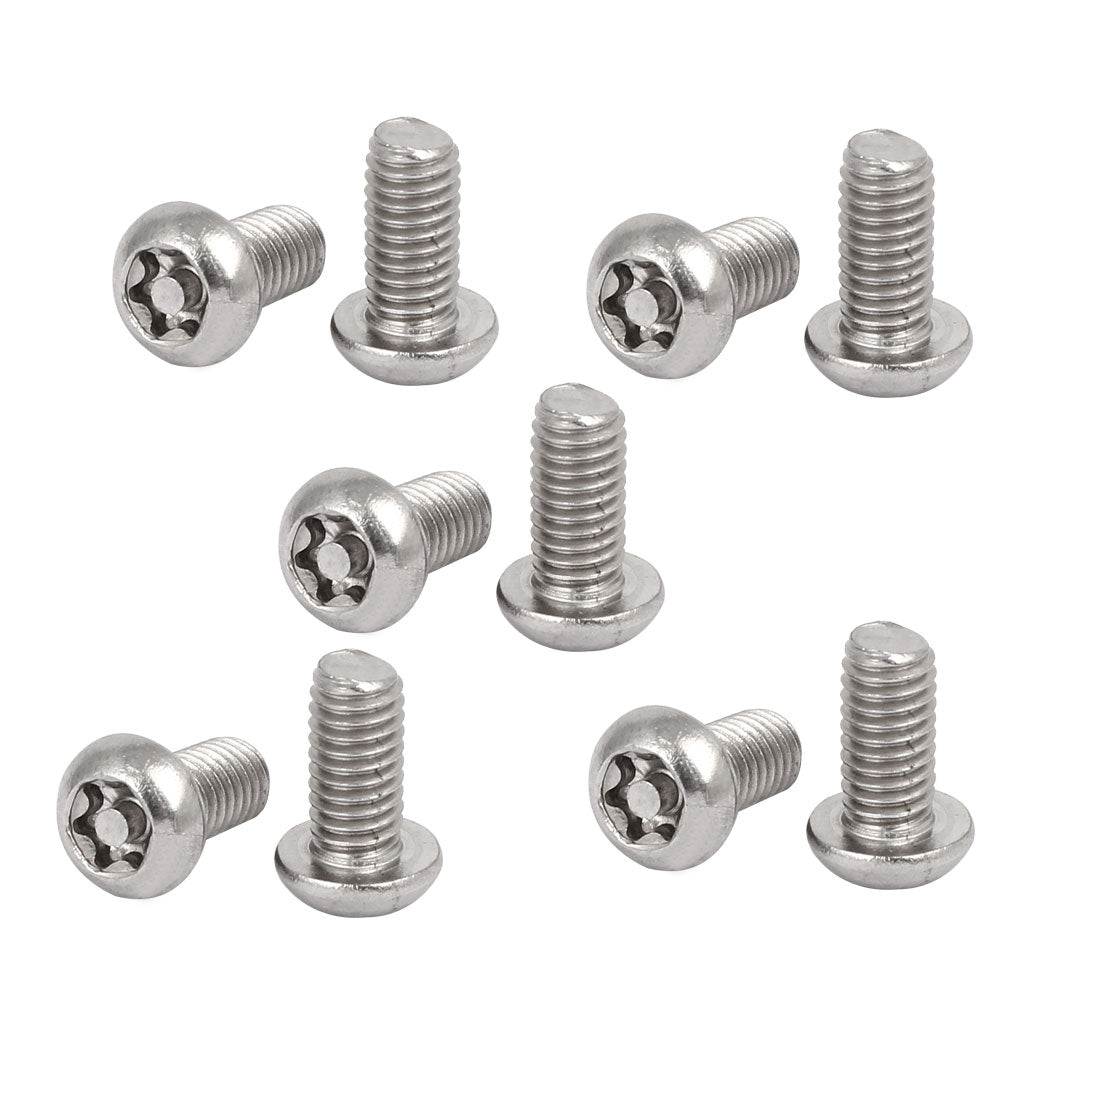 uxcell Uxcell M6x12mm 304 Stainless Steel Button Head Torx Security Tamper Proof Screws 10pcs